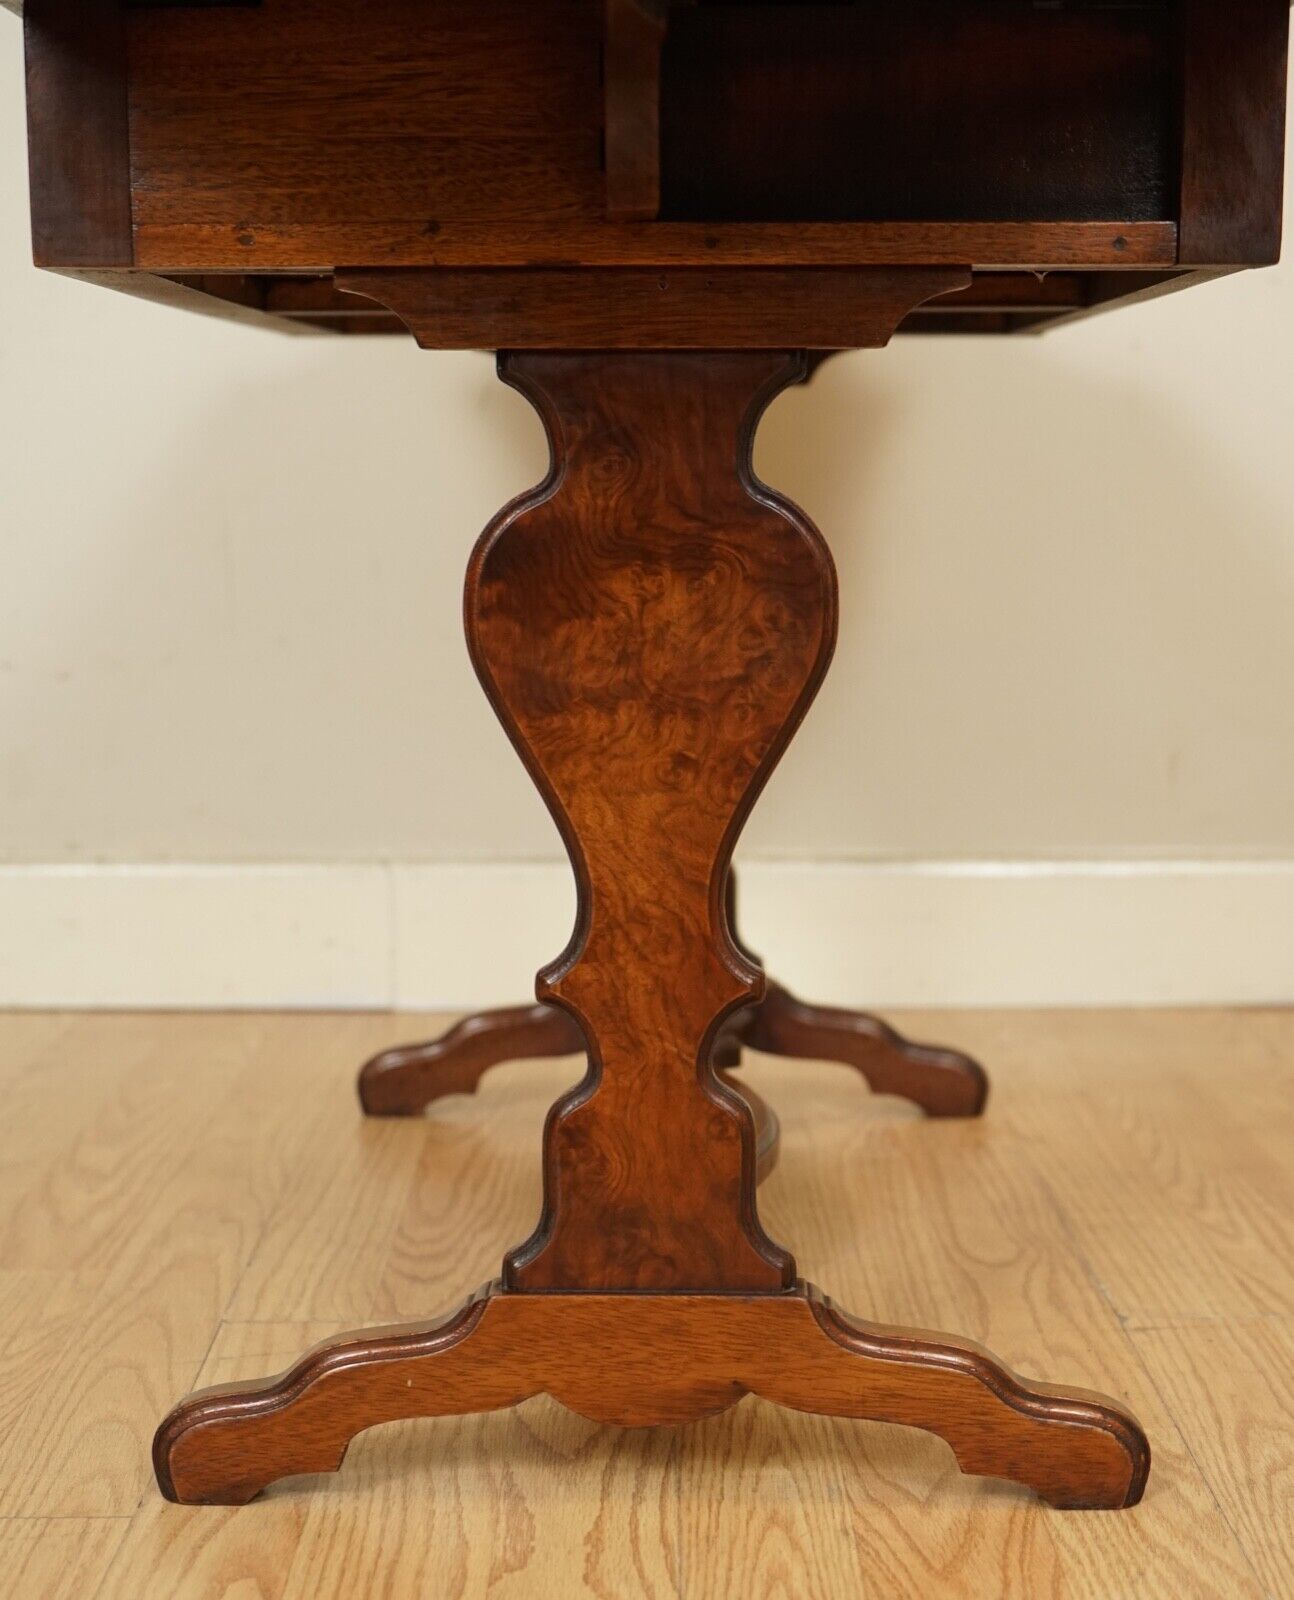 LOVELY BEVAN AND FUNNELL BURR WALNUT EXTENDING DROPLEAF SIDE END TABLE